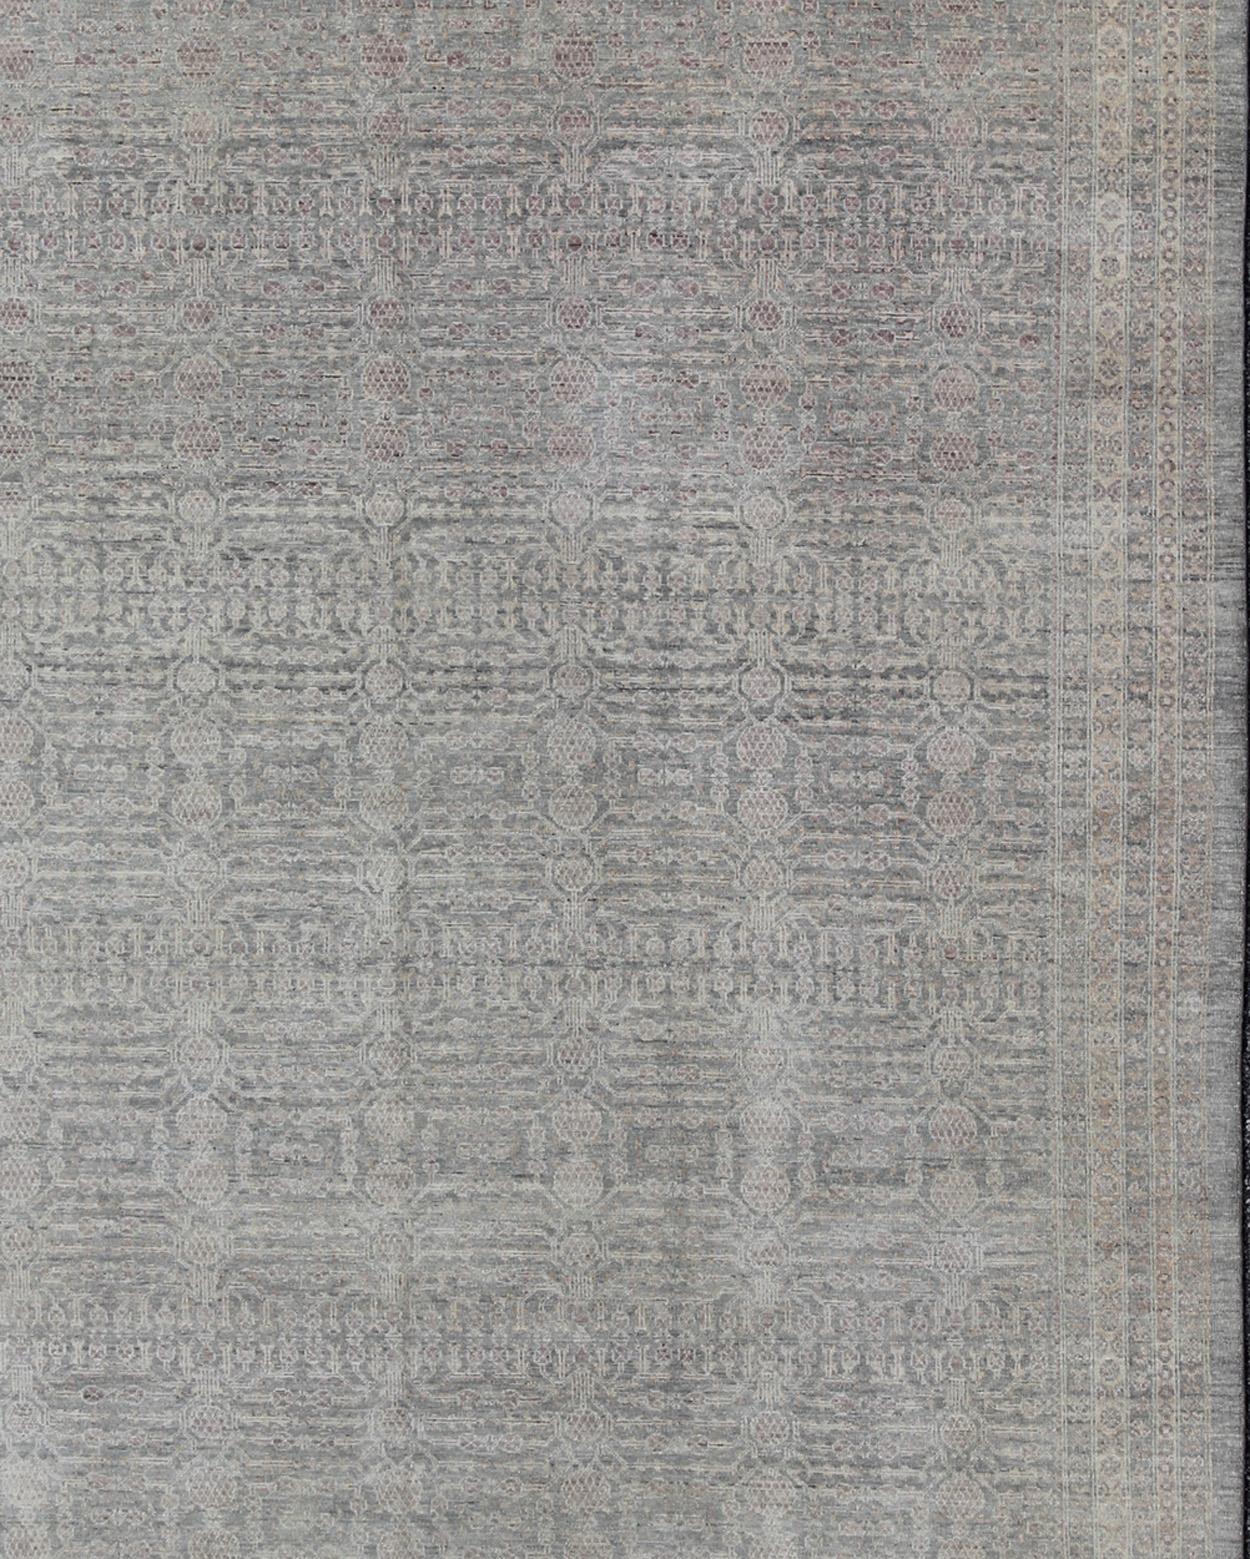 Transitional Khotan Pomegranate Design Rug by Keivan Woven Arts In New Condition For Sale In Atlanta, GA